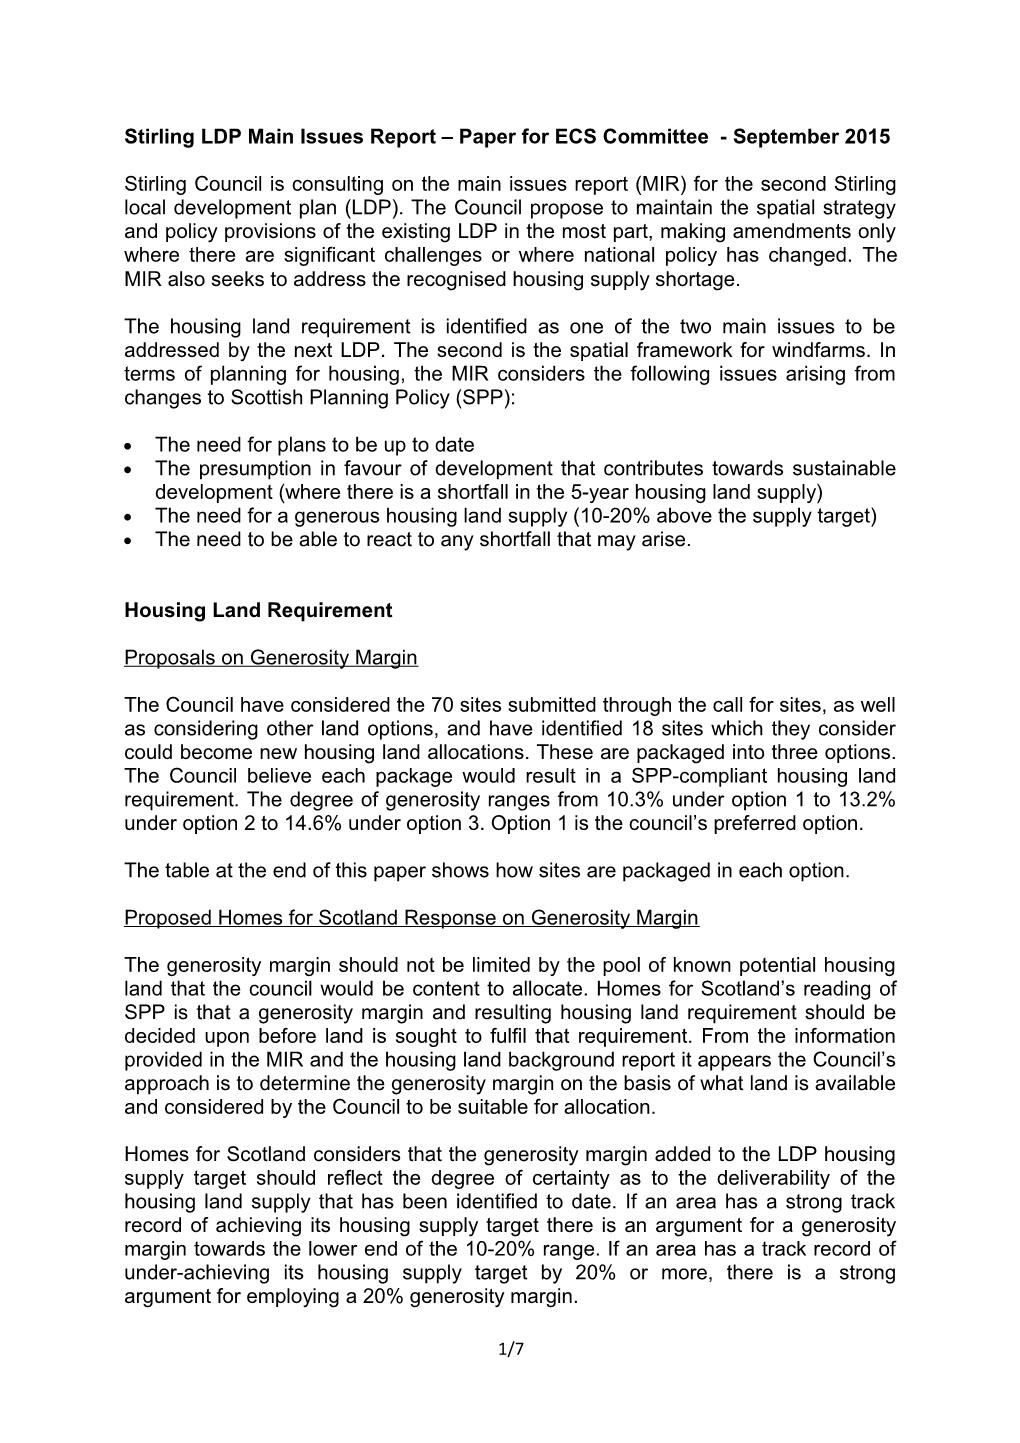 Stirling LDP Main Issues Report Paper for ECS Committee - September 2015